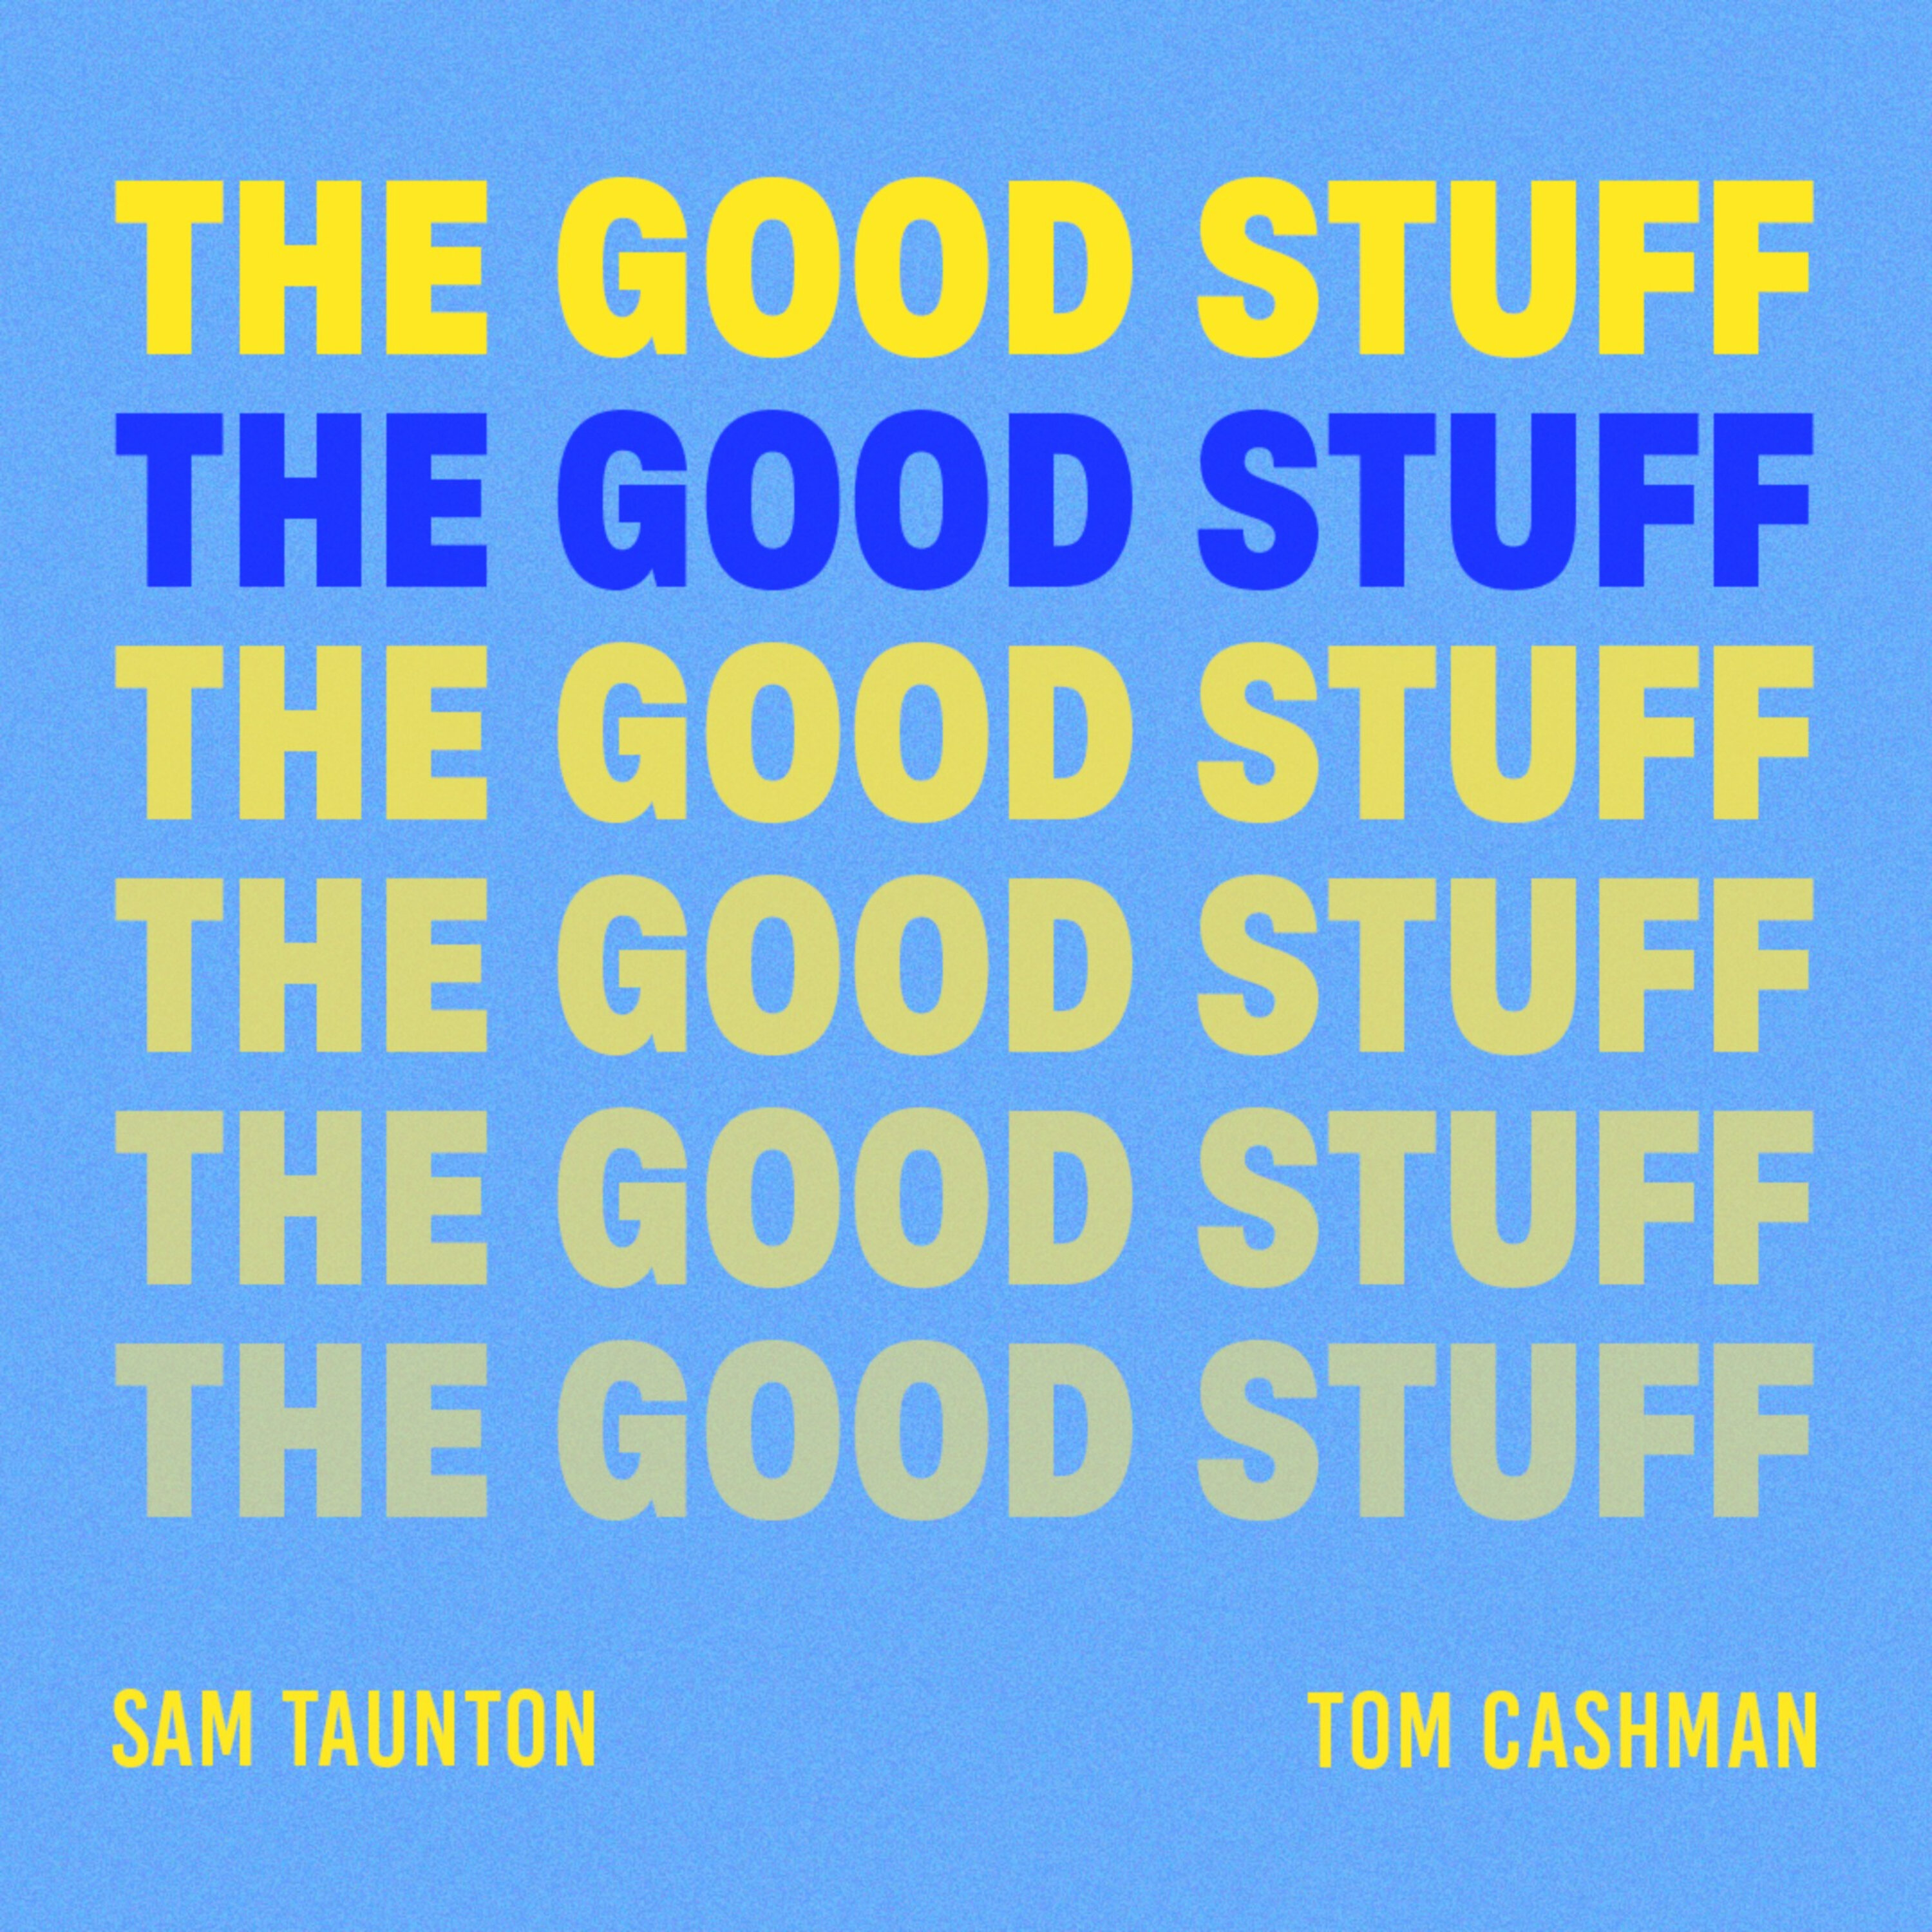 The Good Stuff - Episode 64 - Crime and Embarrassment